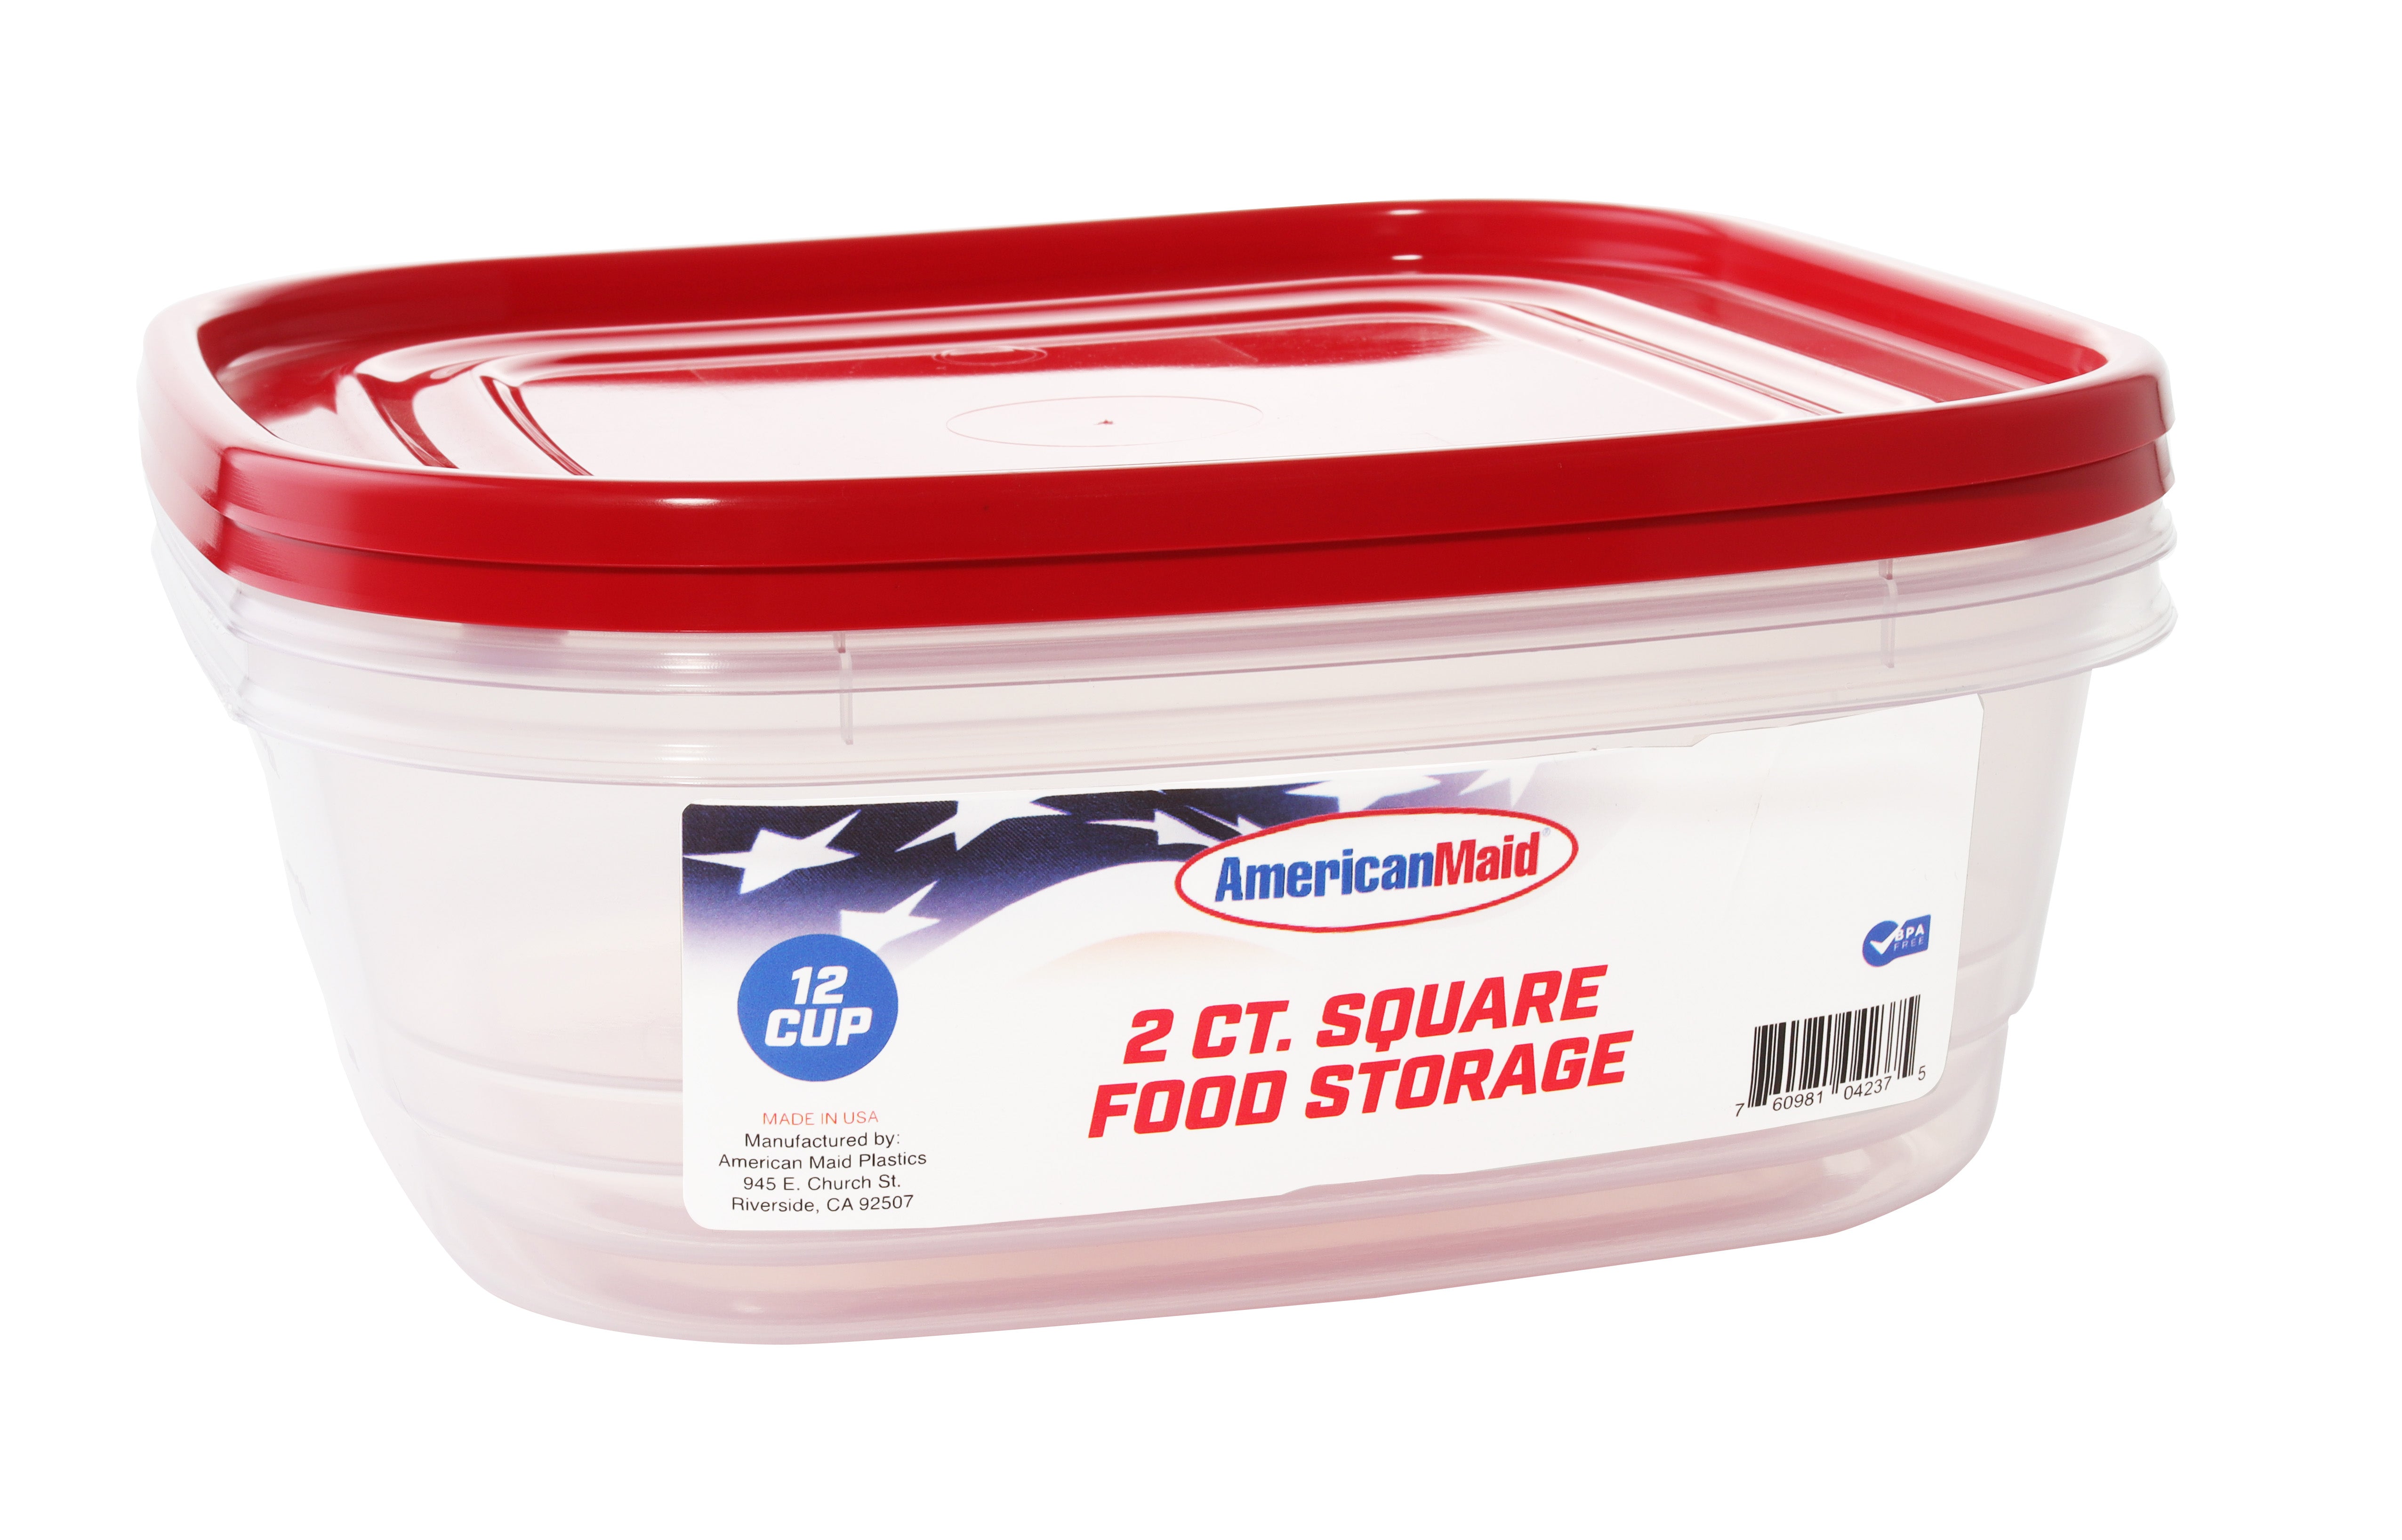 Plastic Food Containers and Dishes  The American Cleaning Institute (ACI)